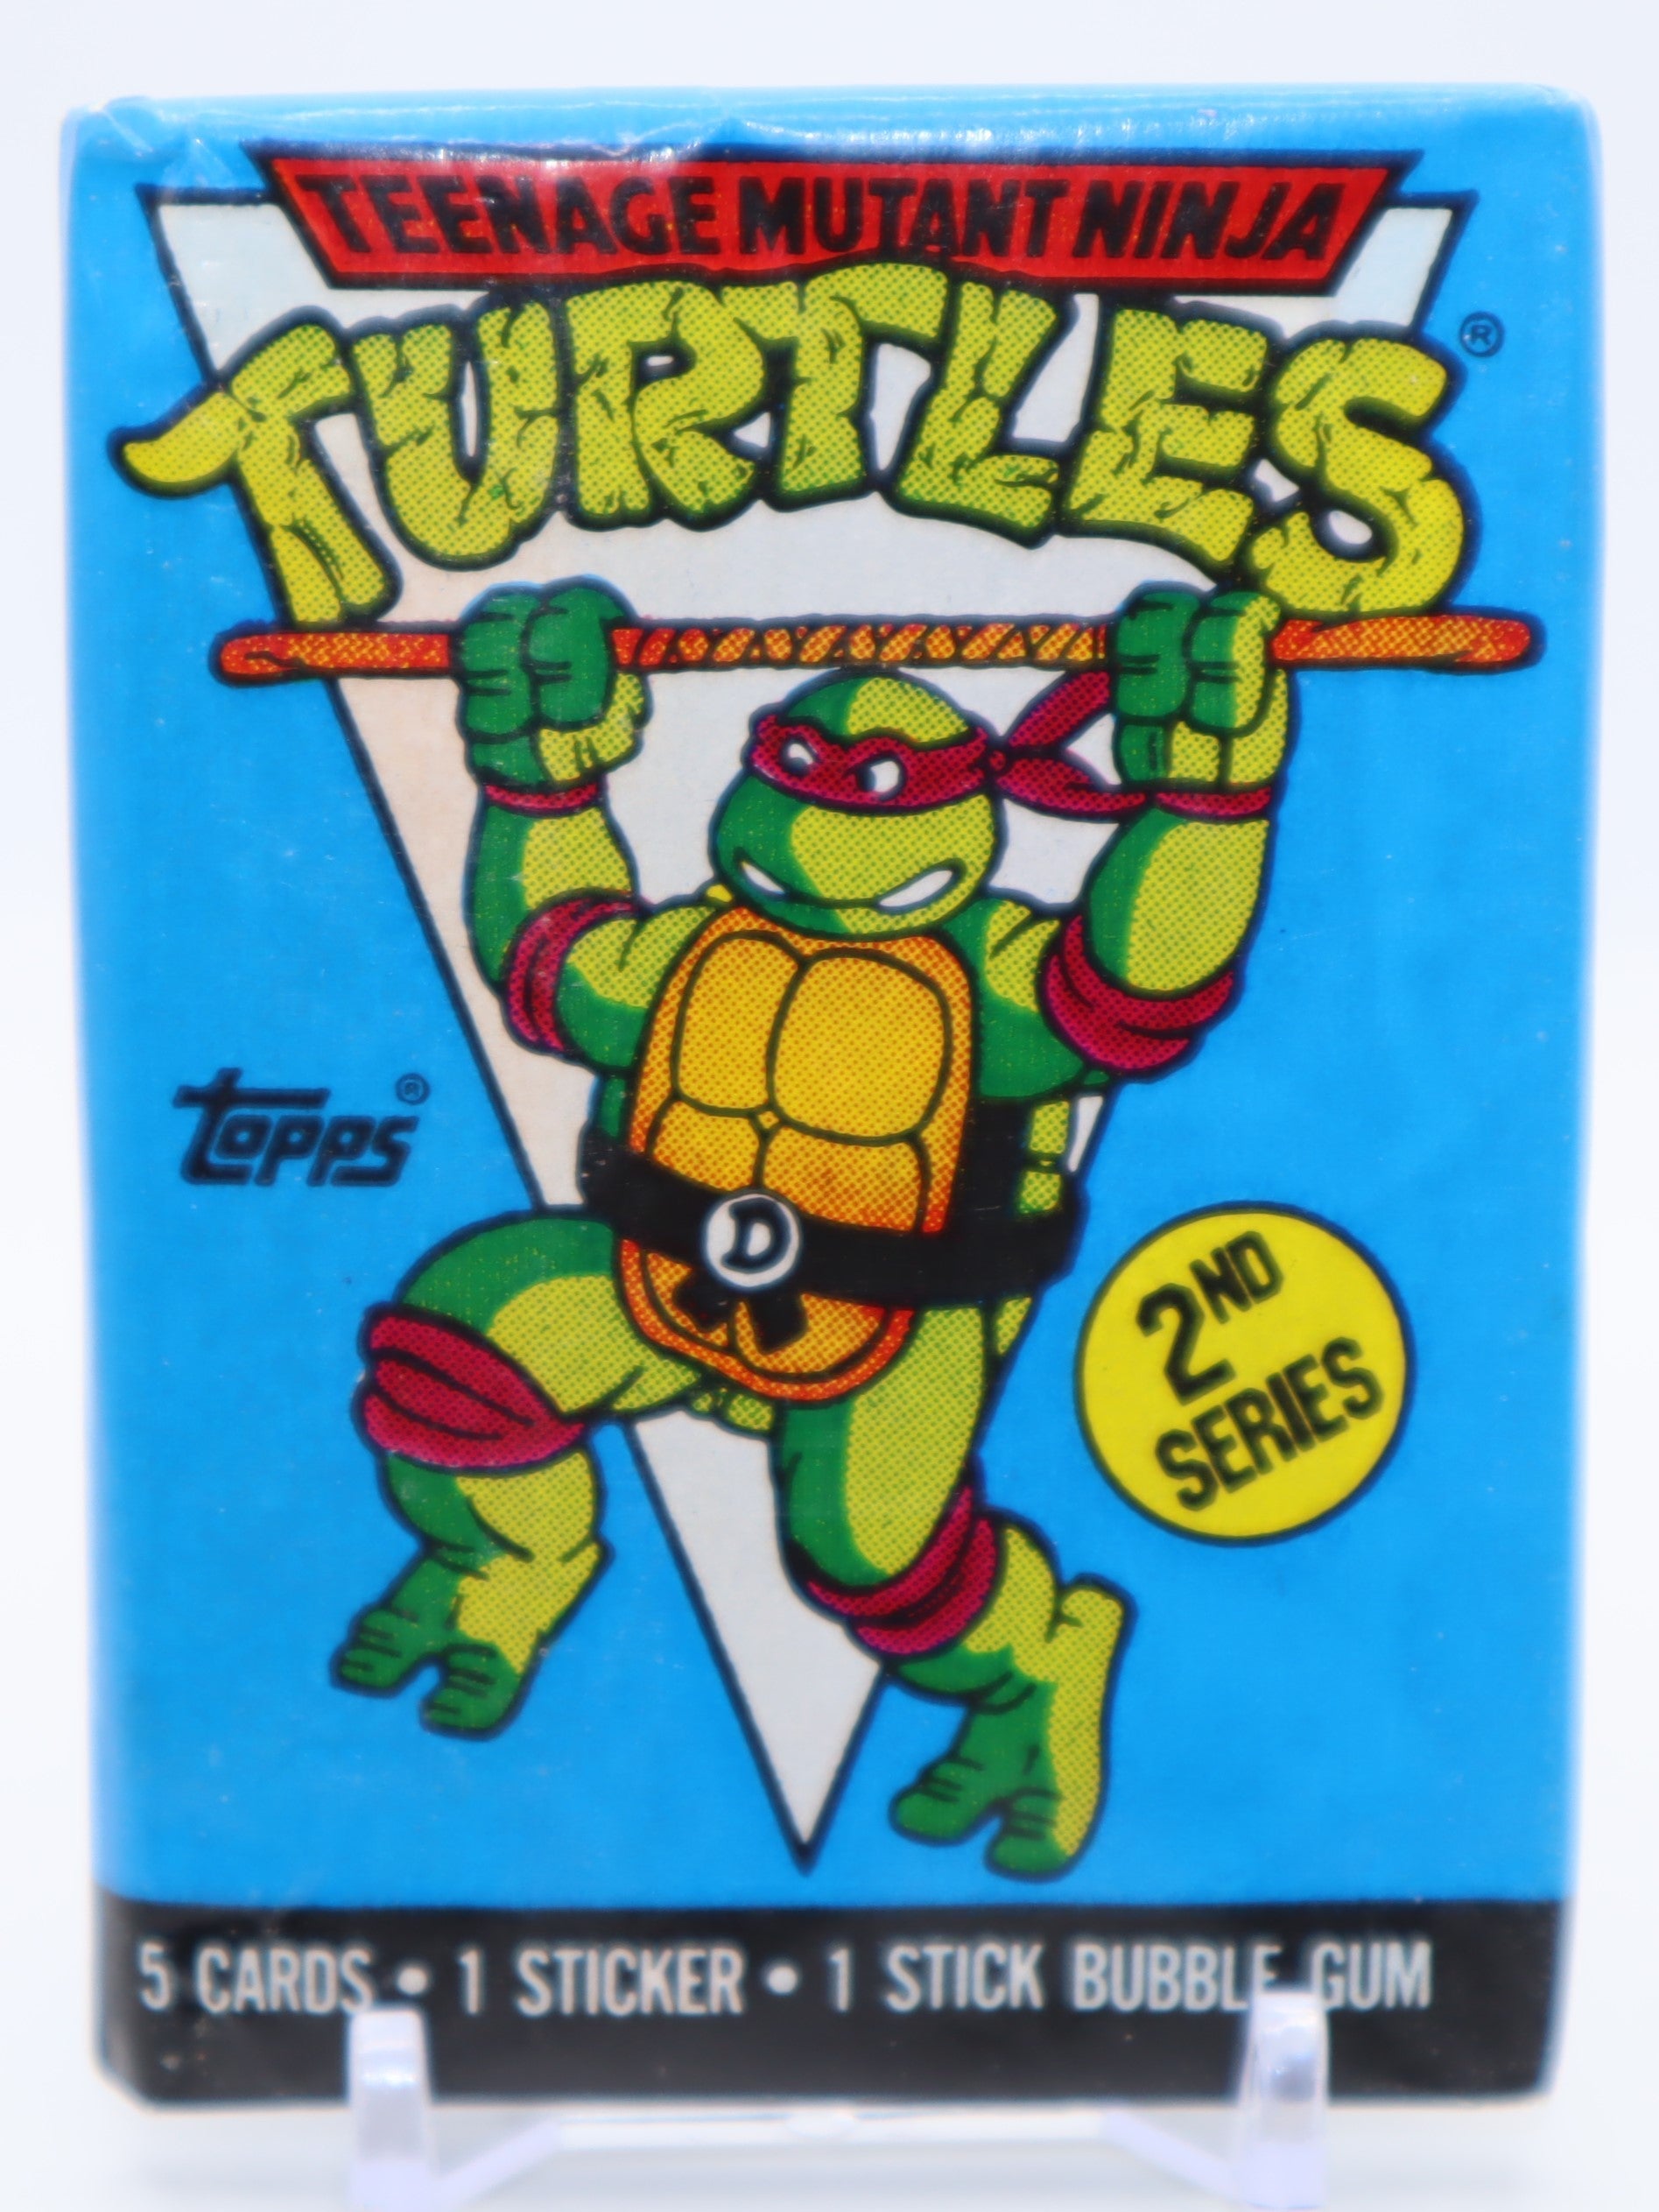 1990 Topps Teenage Mutant Ninja Turtles Series 2 Trading Cards Wax Pack - Collectibles